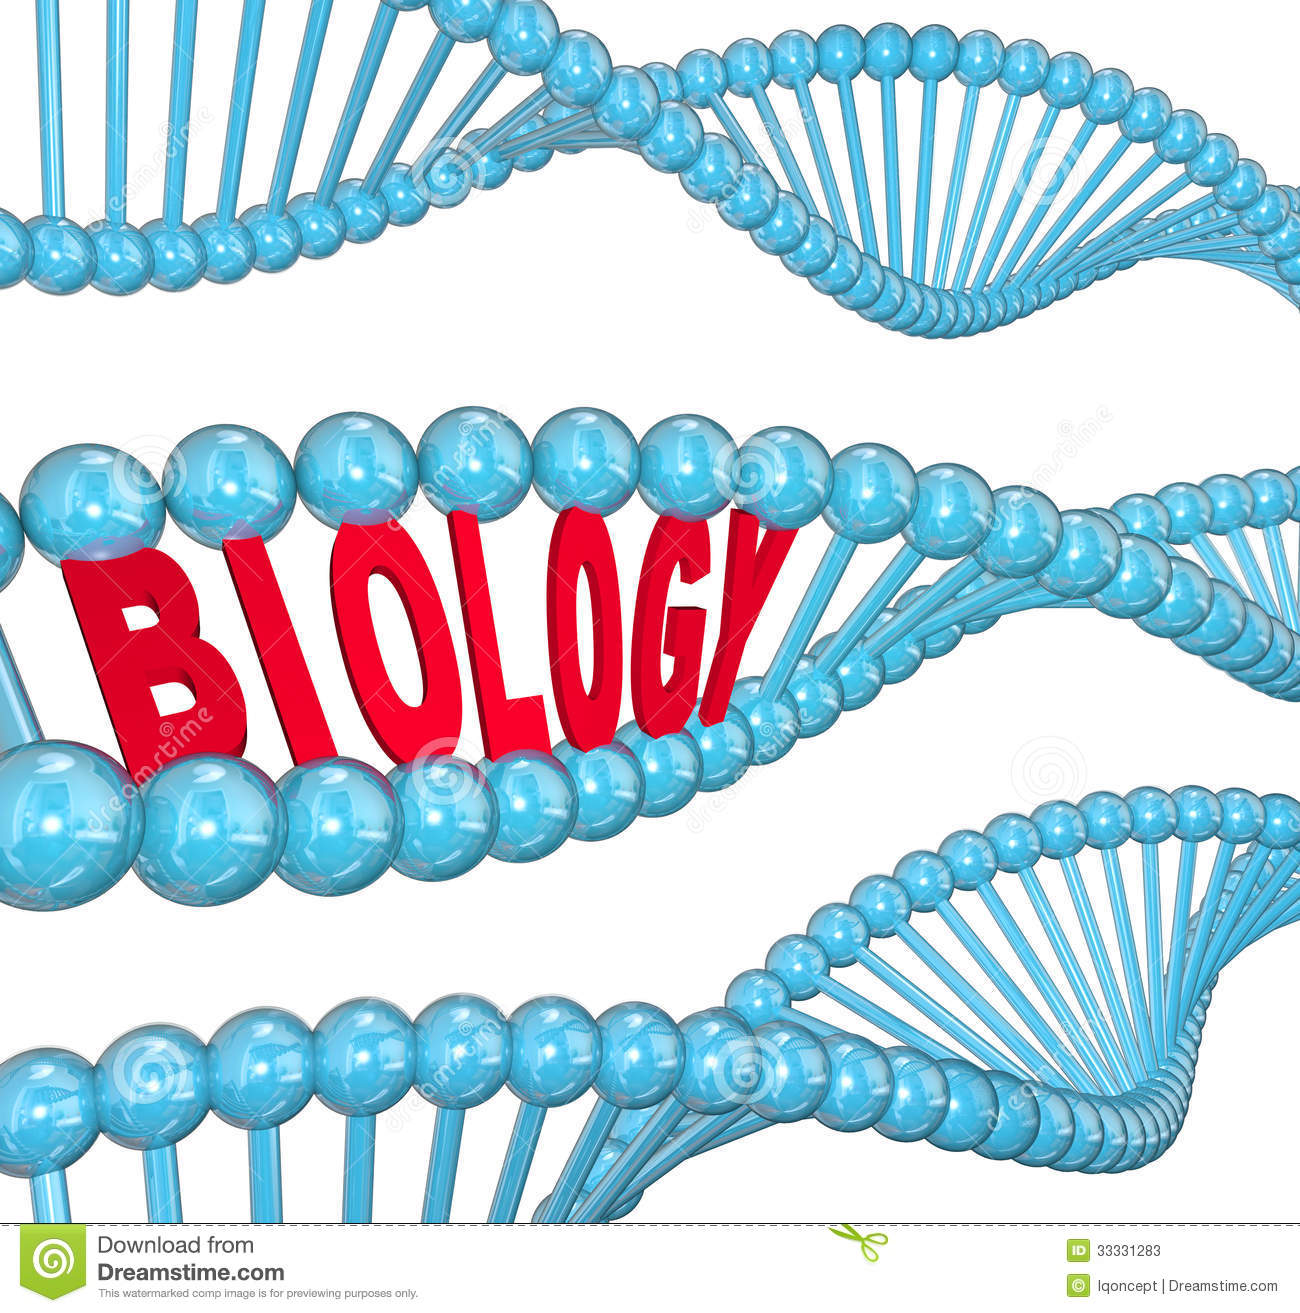 The Word Biology In A Strand Of Dna To Illustrate Learning About